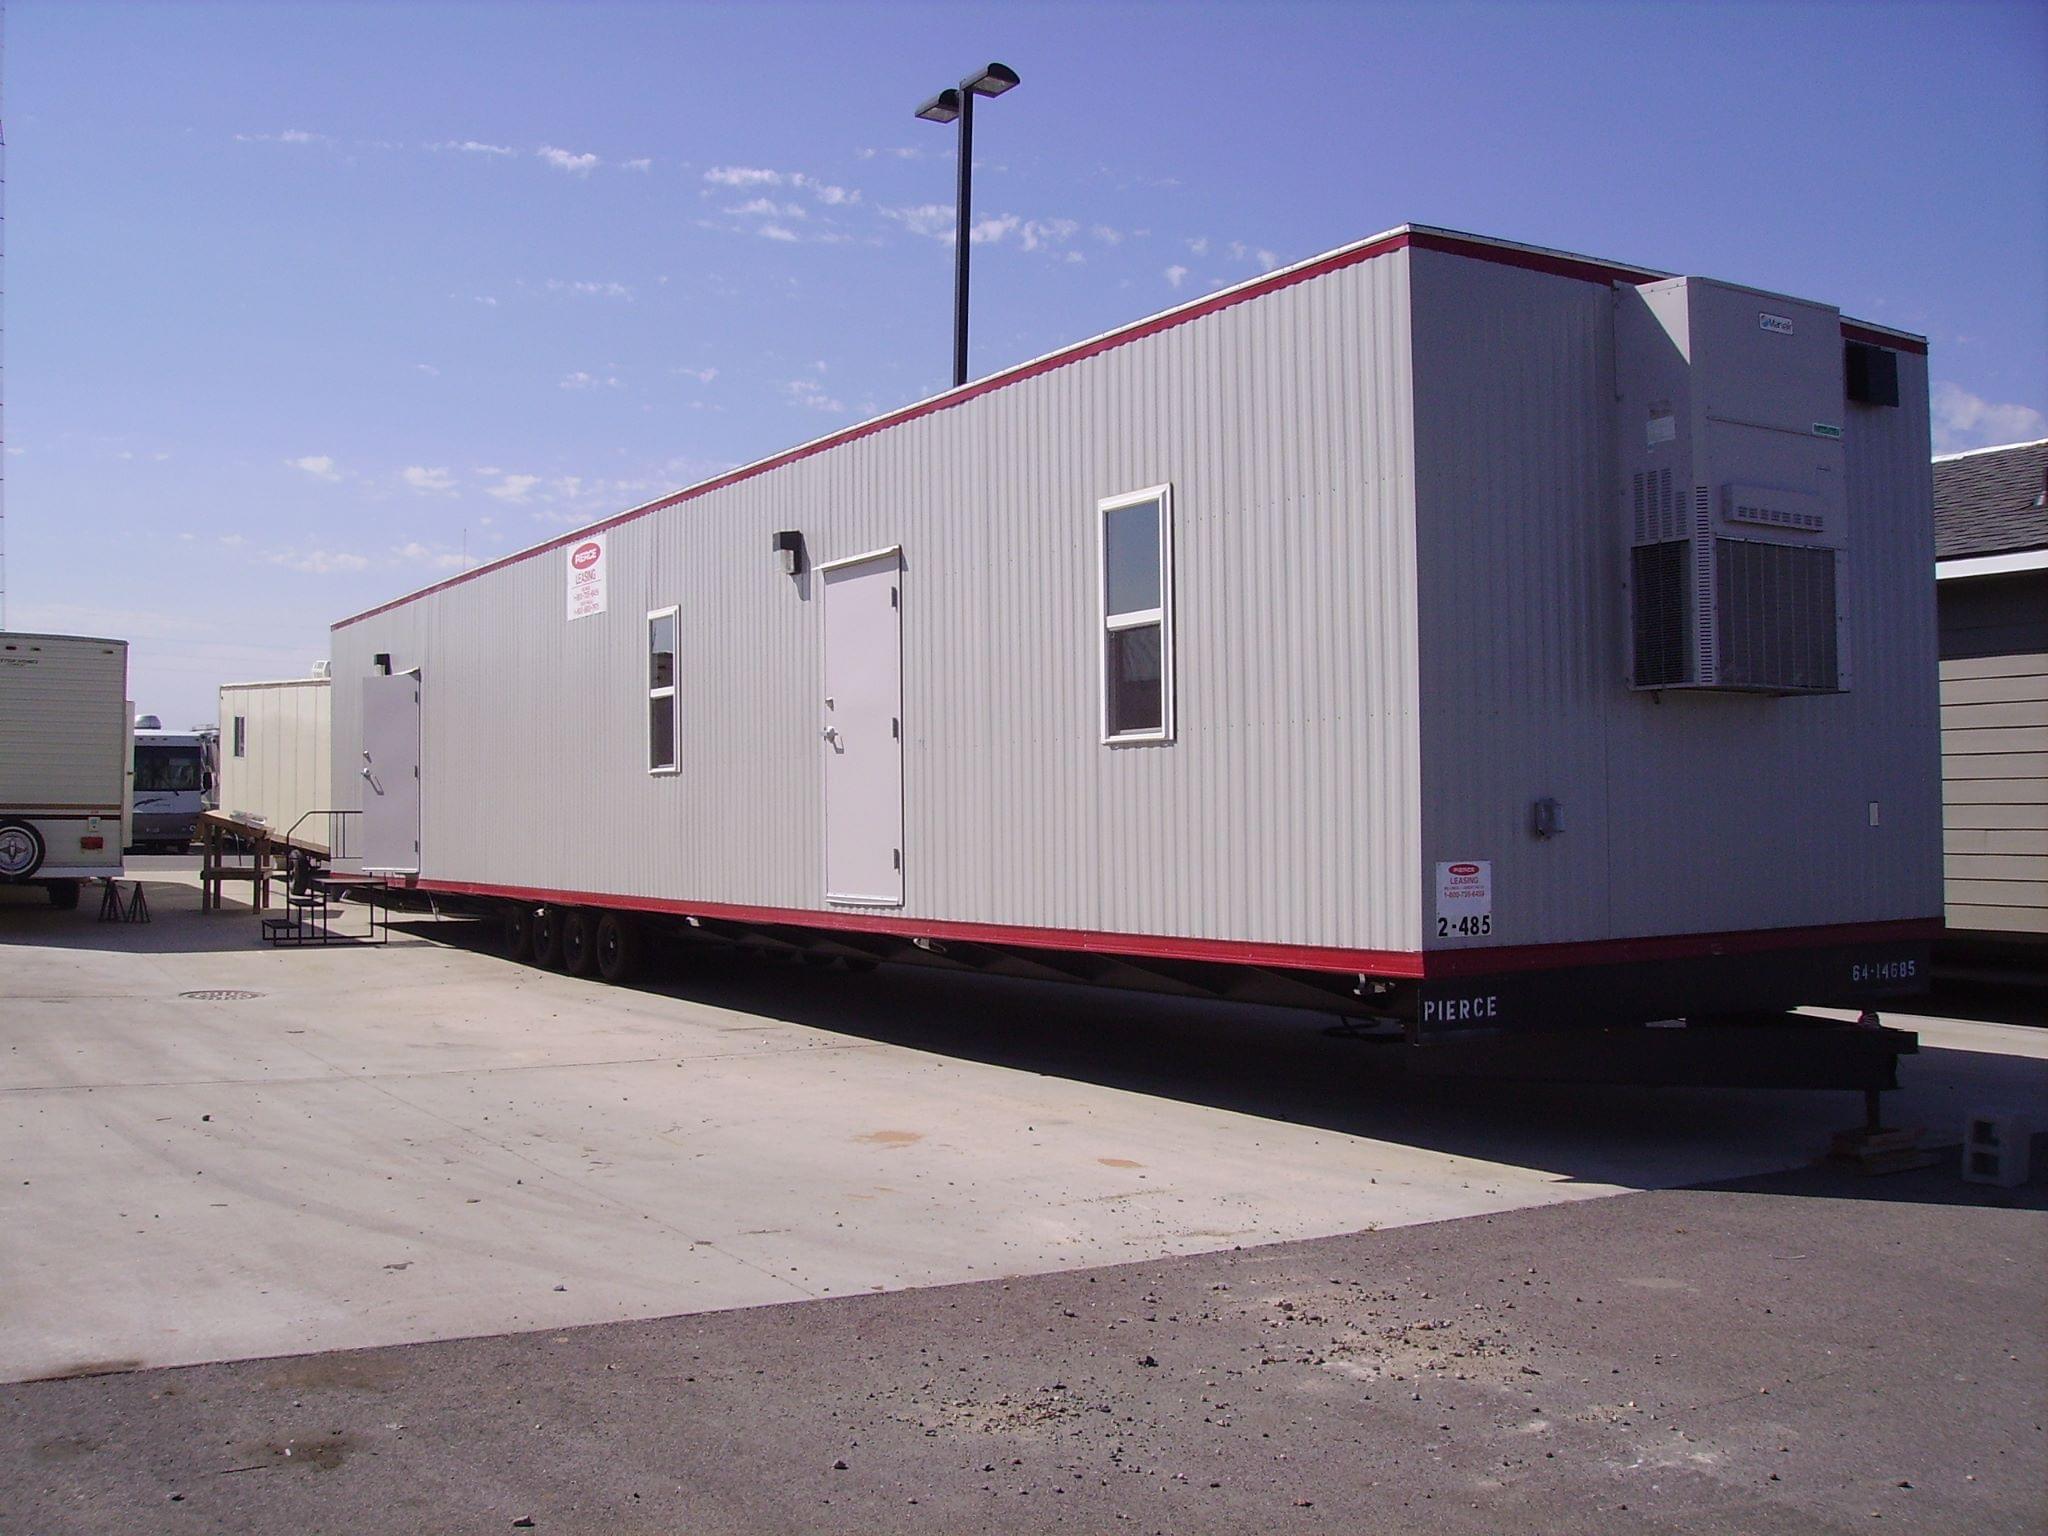 Single or large complexs, temporary or permanent offices, we have several options that will fit your needs. Come to Pierce Leasing, we specialize in mobile offices and effective structure solutions.